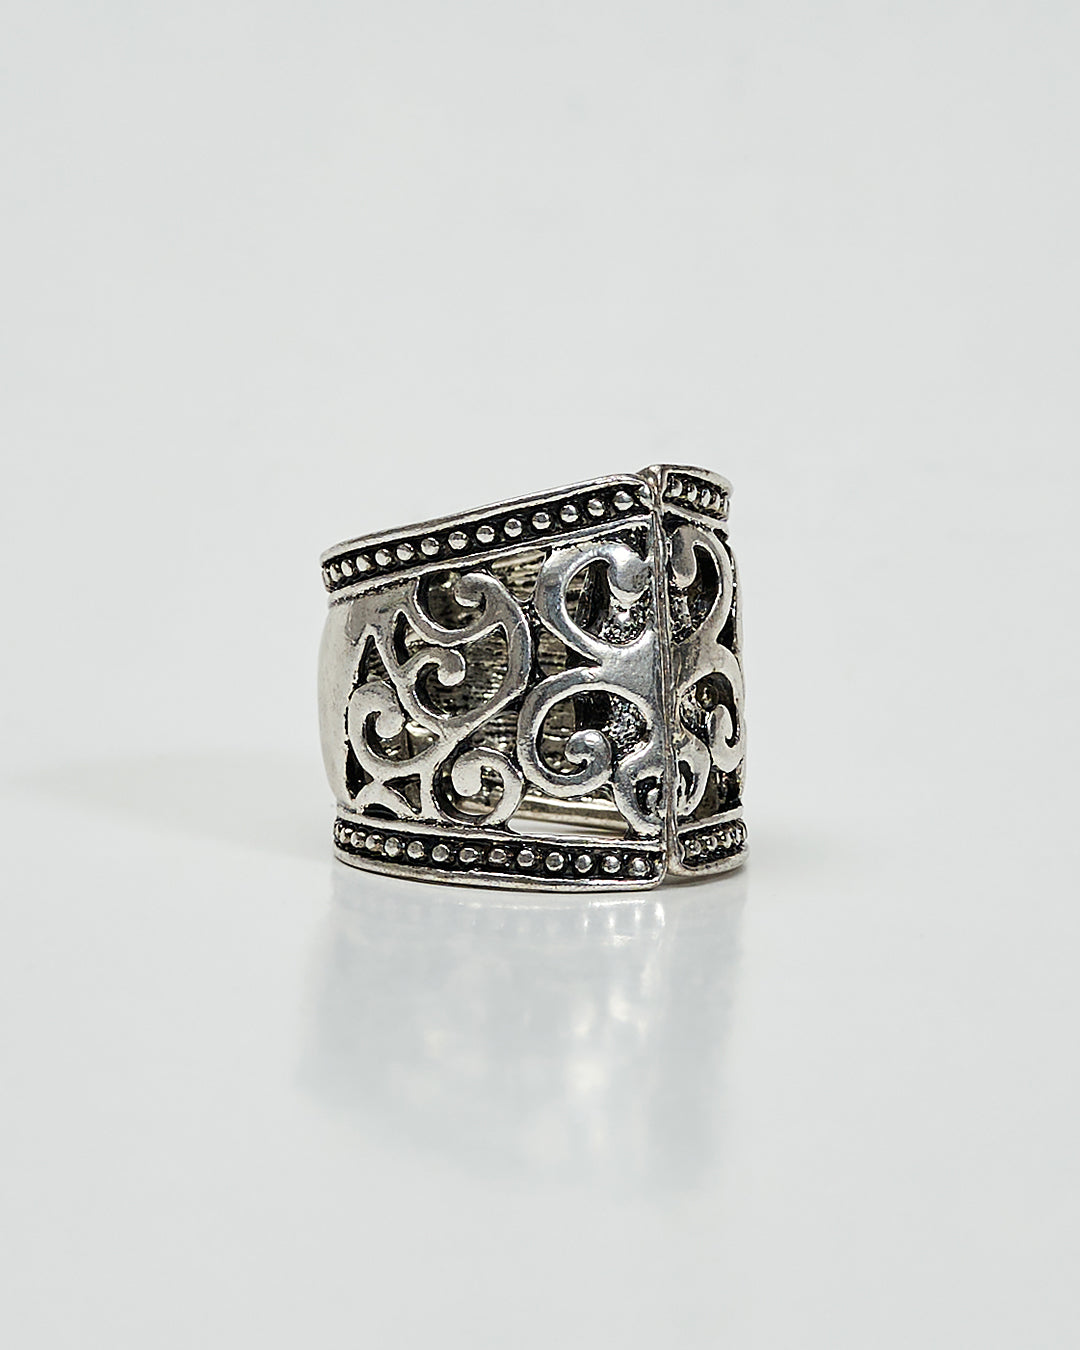 VINTAGE MAGNET Filigree Scarf Charm Ring Antique Silver by Chicago fashion Designer Alesia Chaika